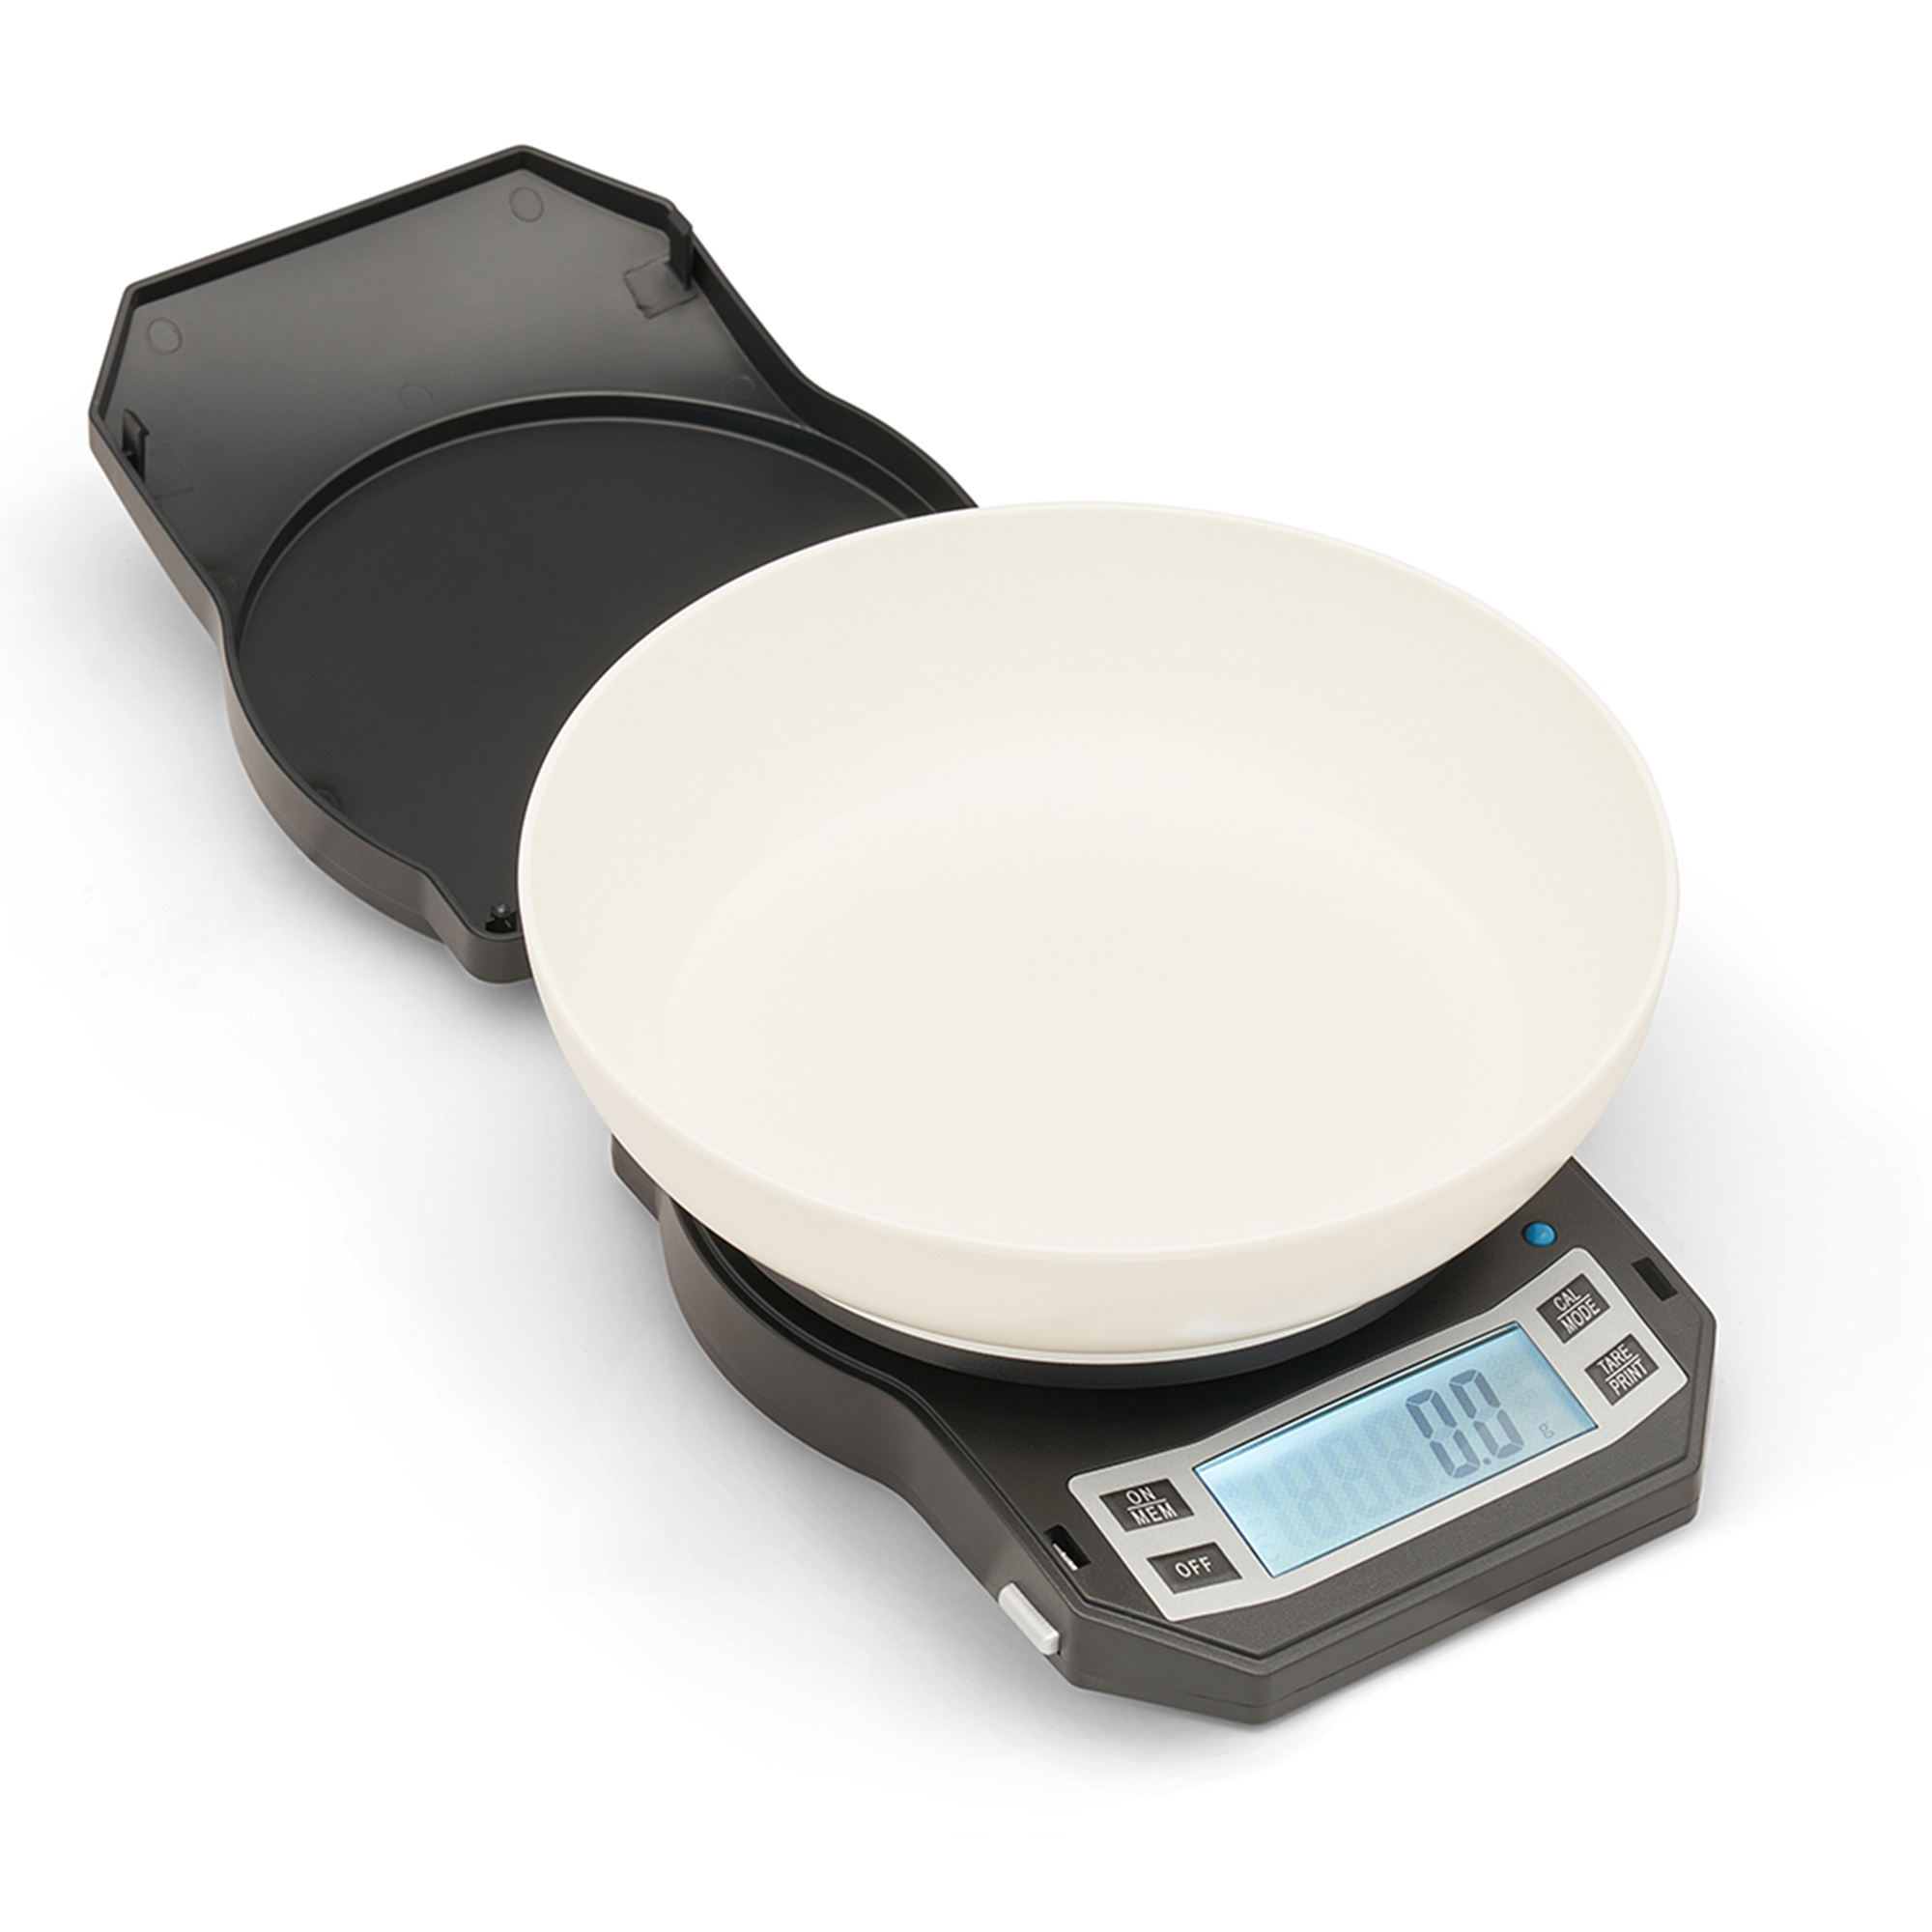 AMW-1000 COMPACT DIGITAL BENCH SCALE, 1KG X 0.1G - American Weigh Scales